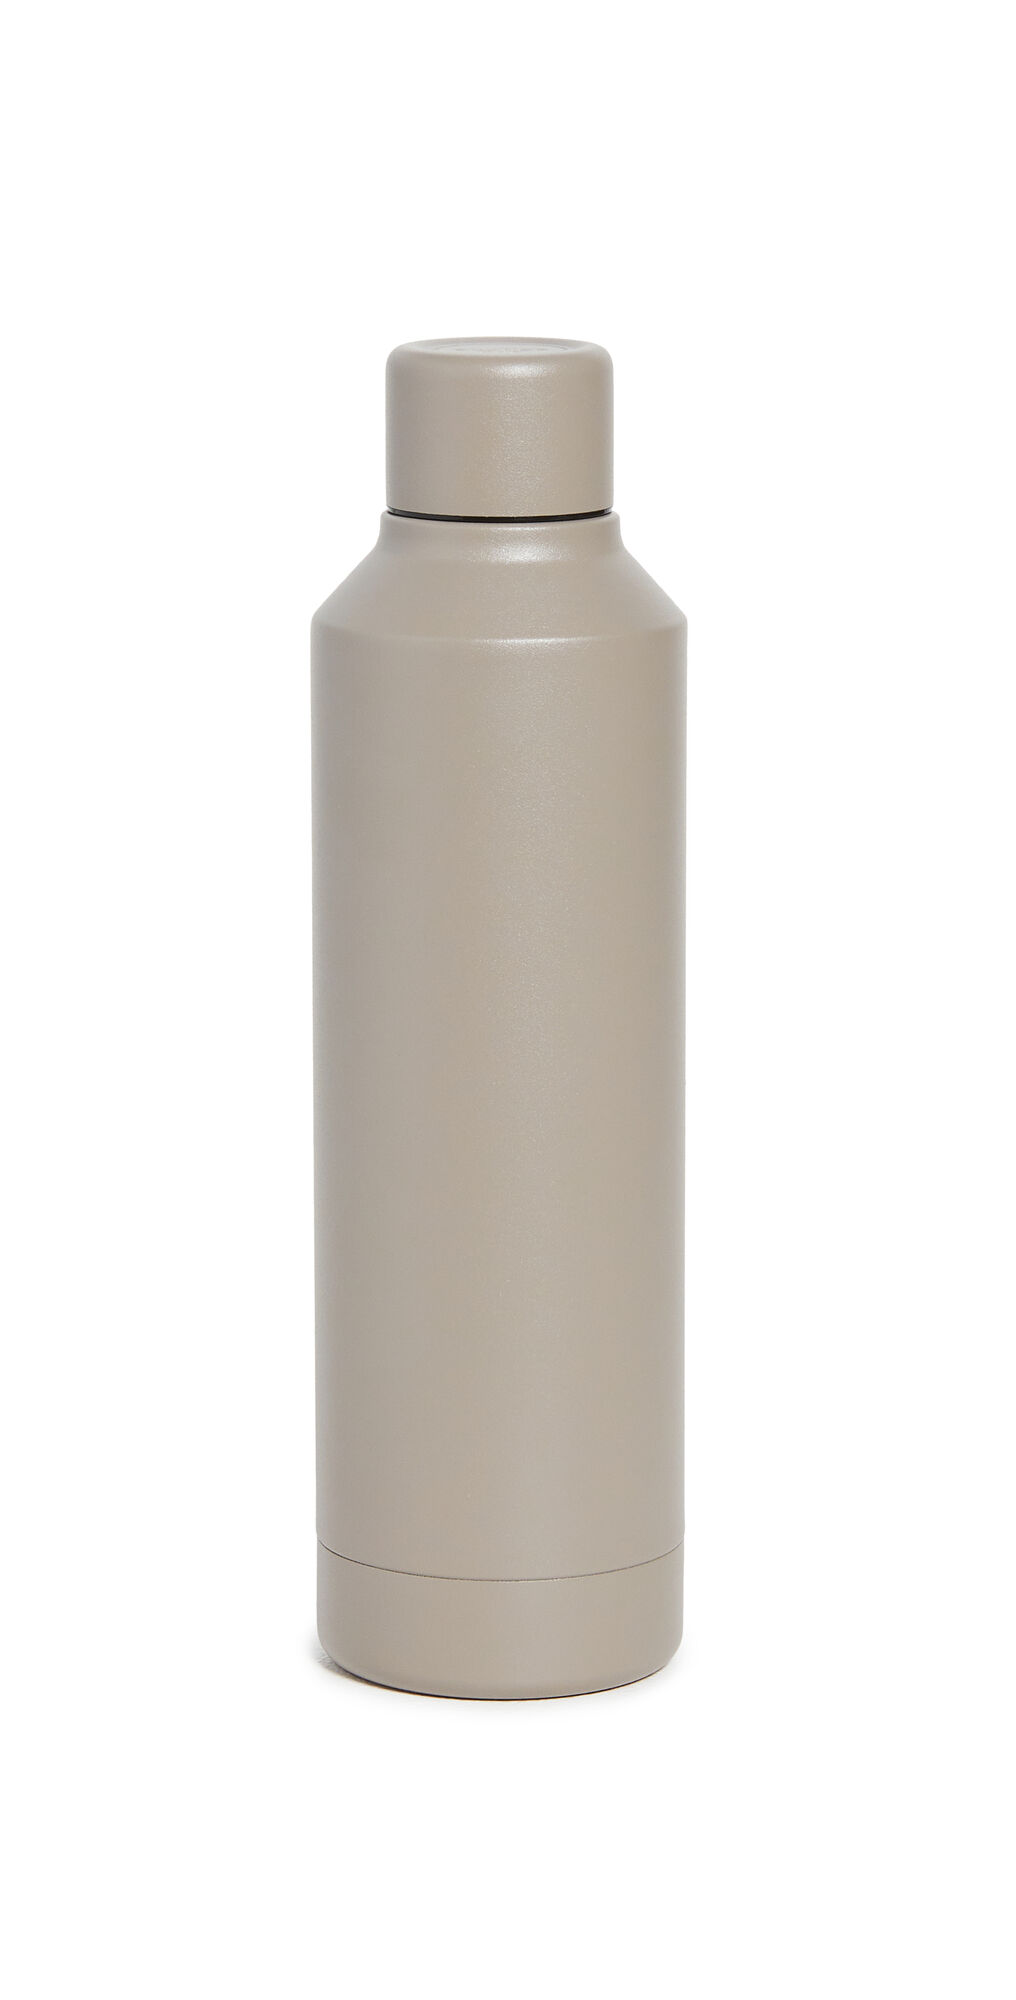 Shopbop Home Shopbop @Home Ecoffee Stainless Steel Water Bottle Molto Grigio One Size  Molto Grigio  size:One Size